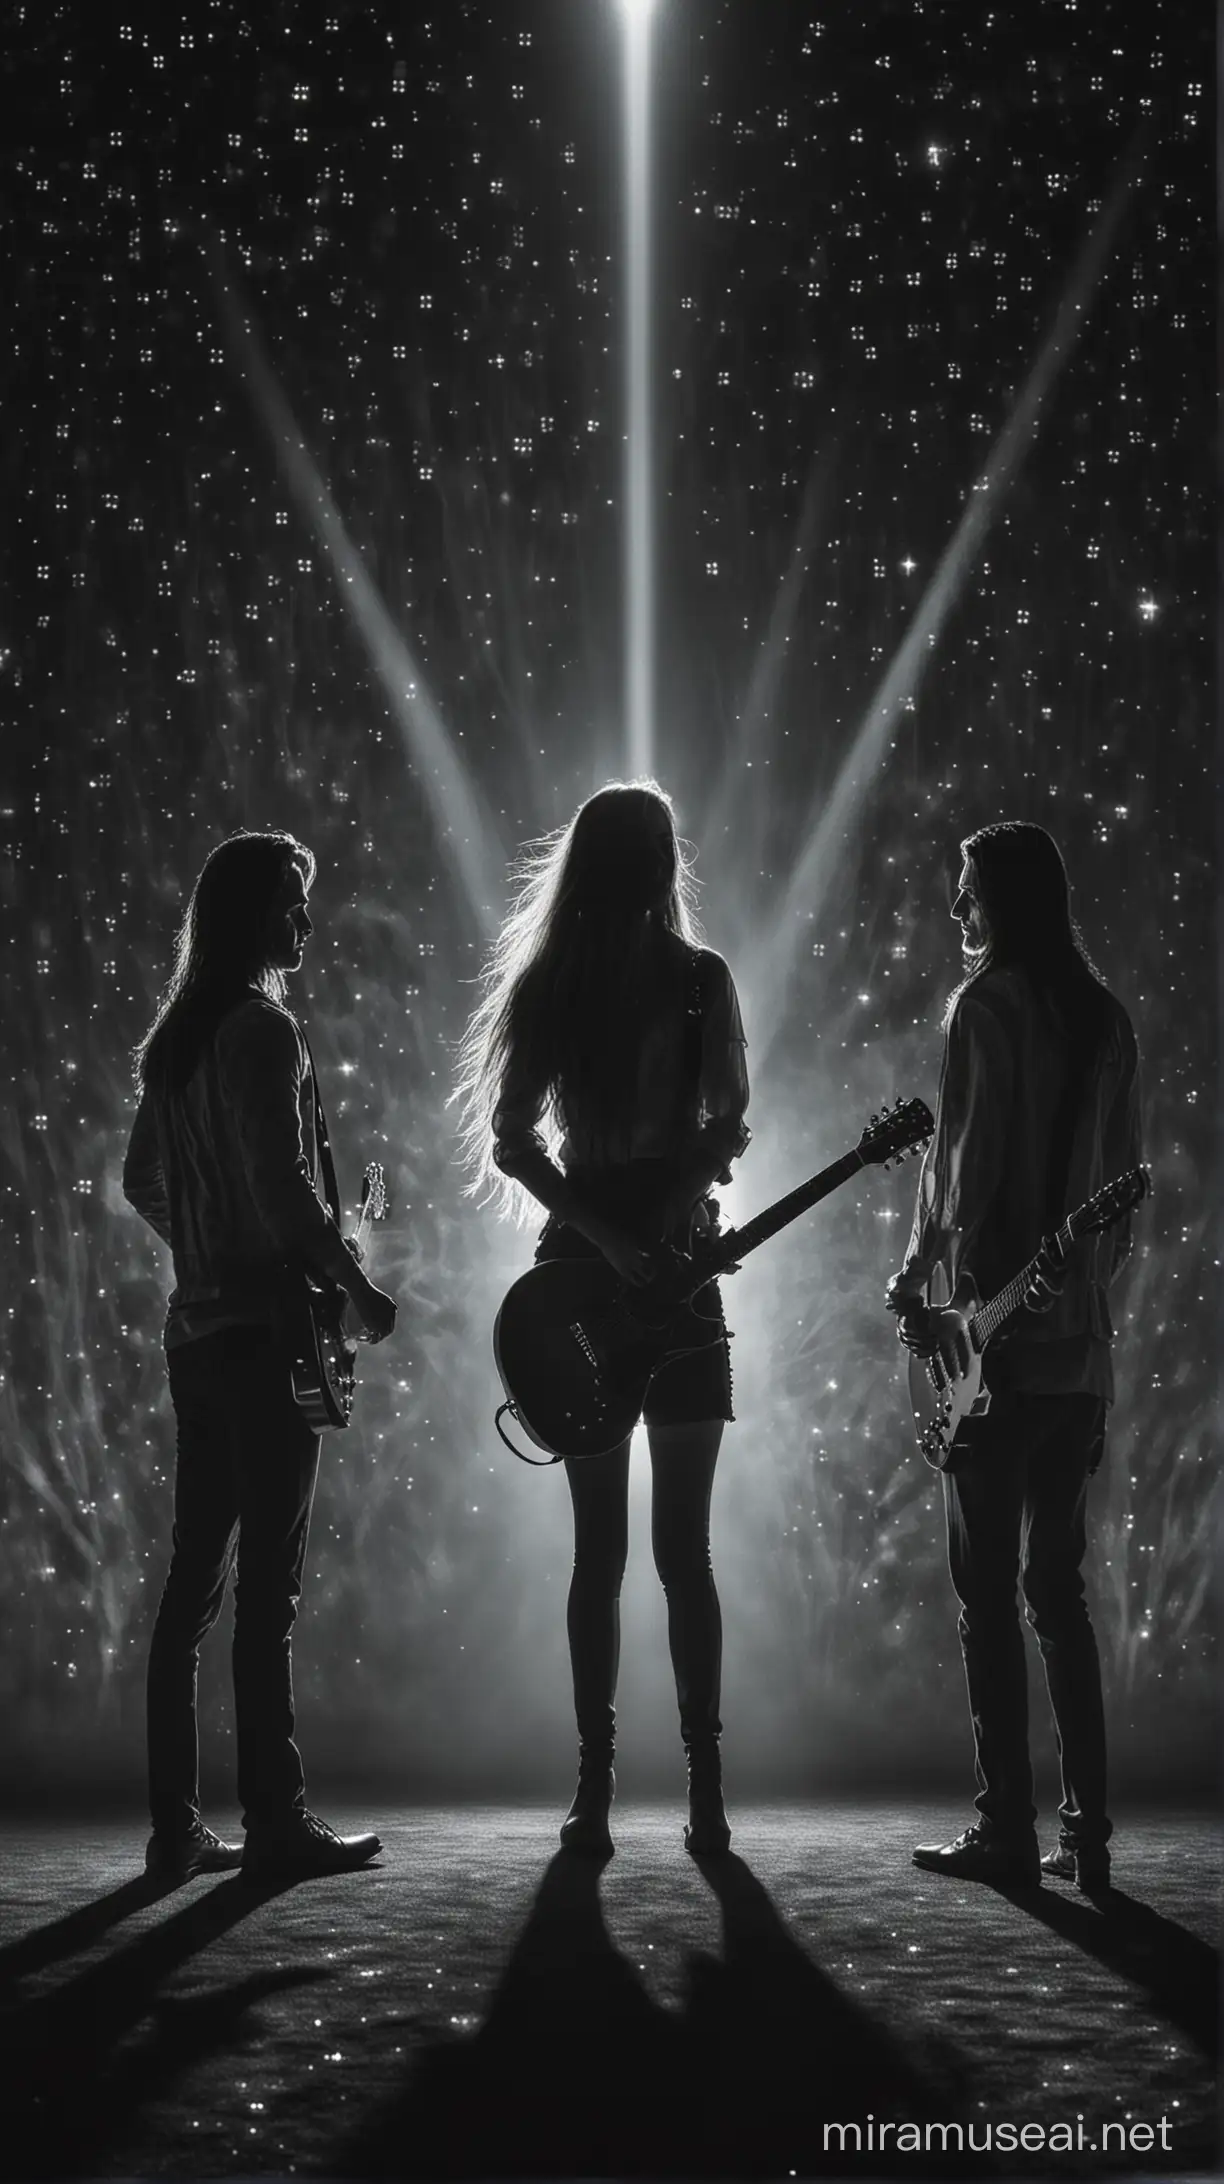 Three people facing away standing on a horizontal row holding a guitar each. One woman with long hair and two men. Lit up as dark shadows, with the space as a background filled with small shining stars.